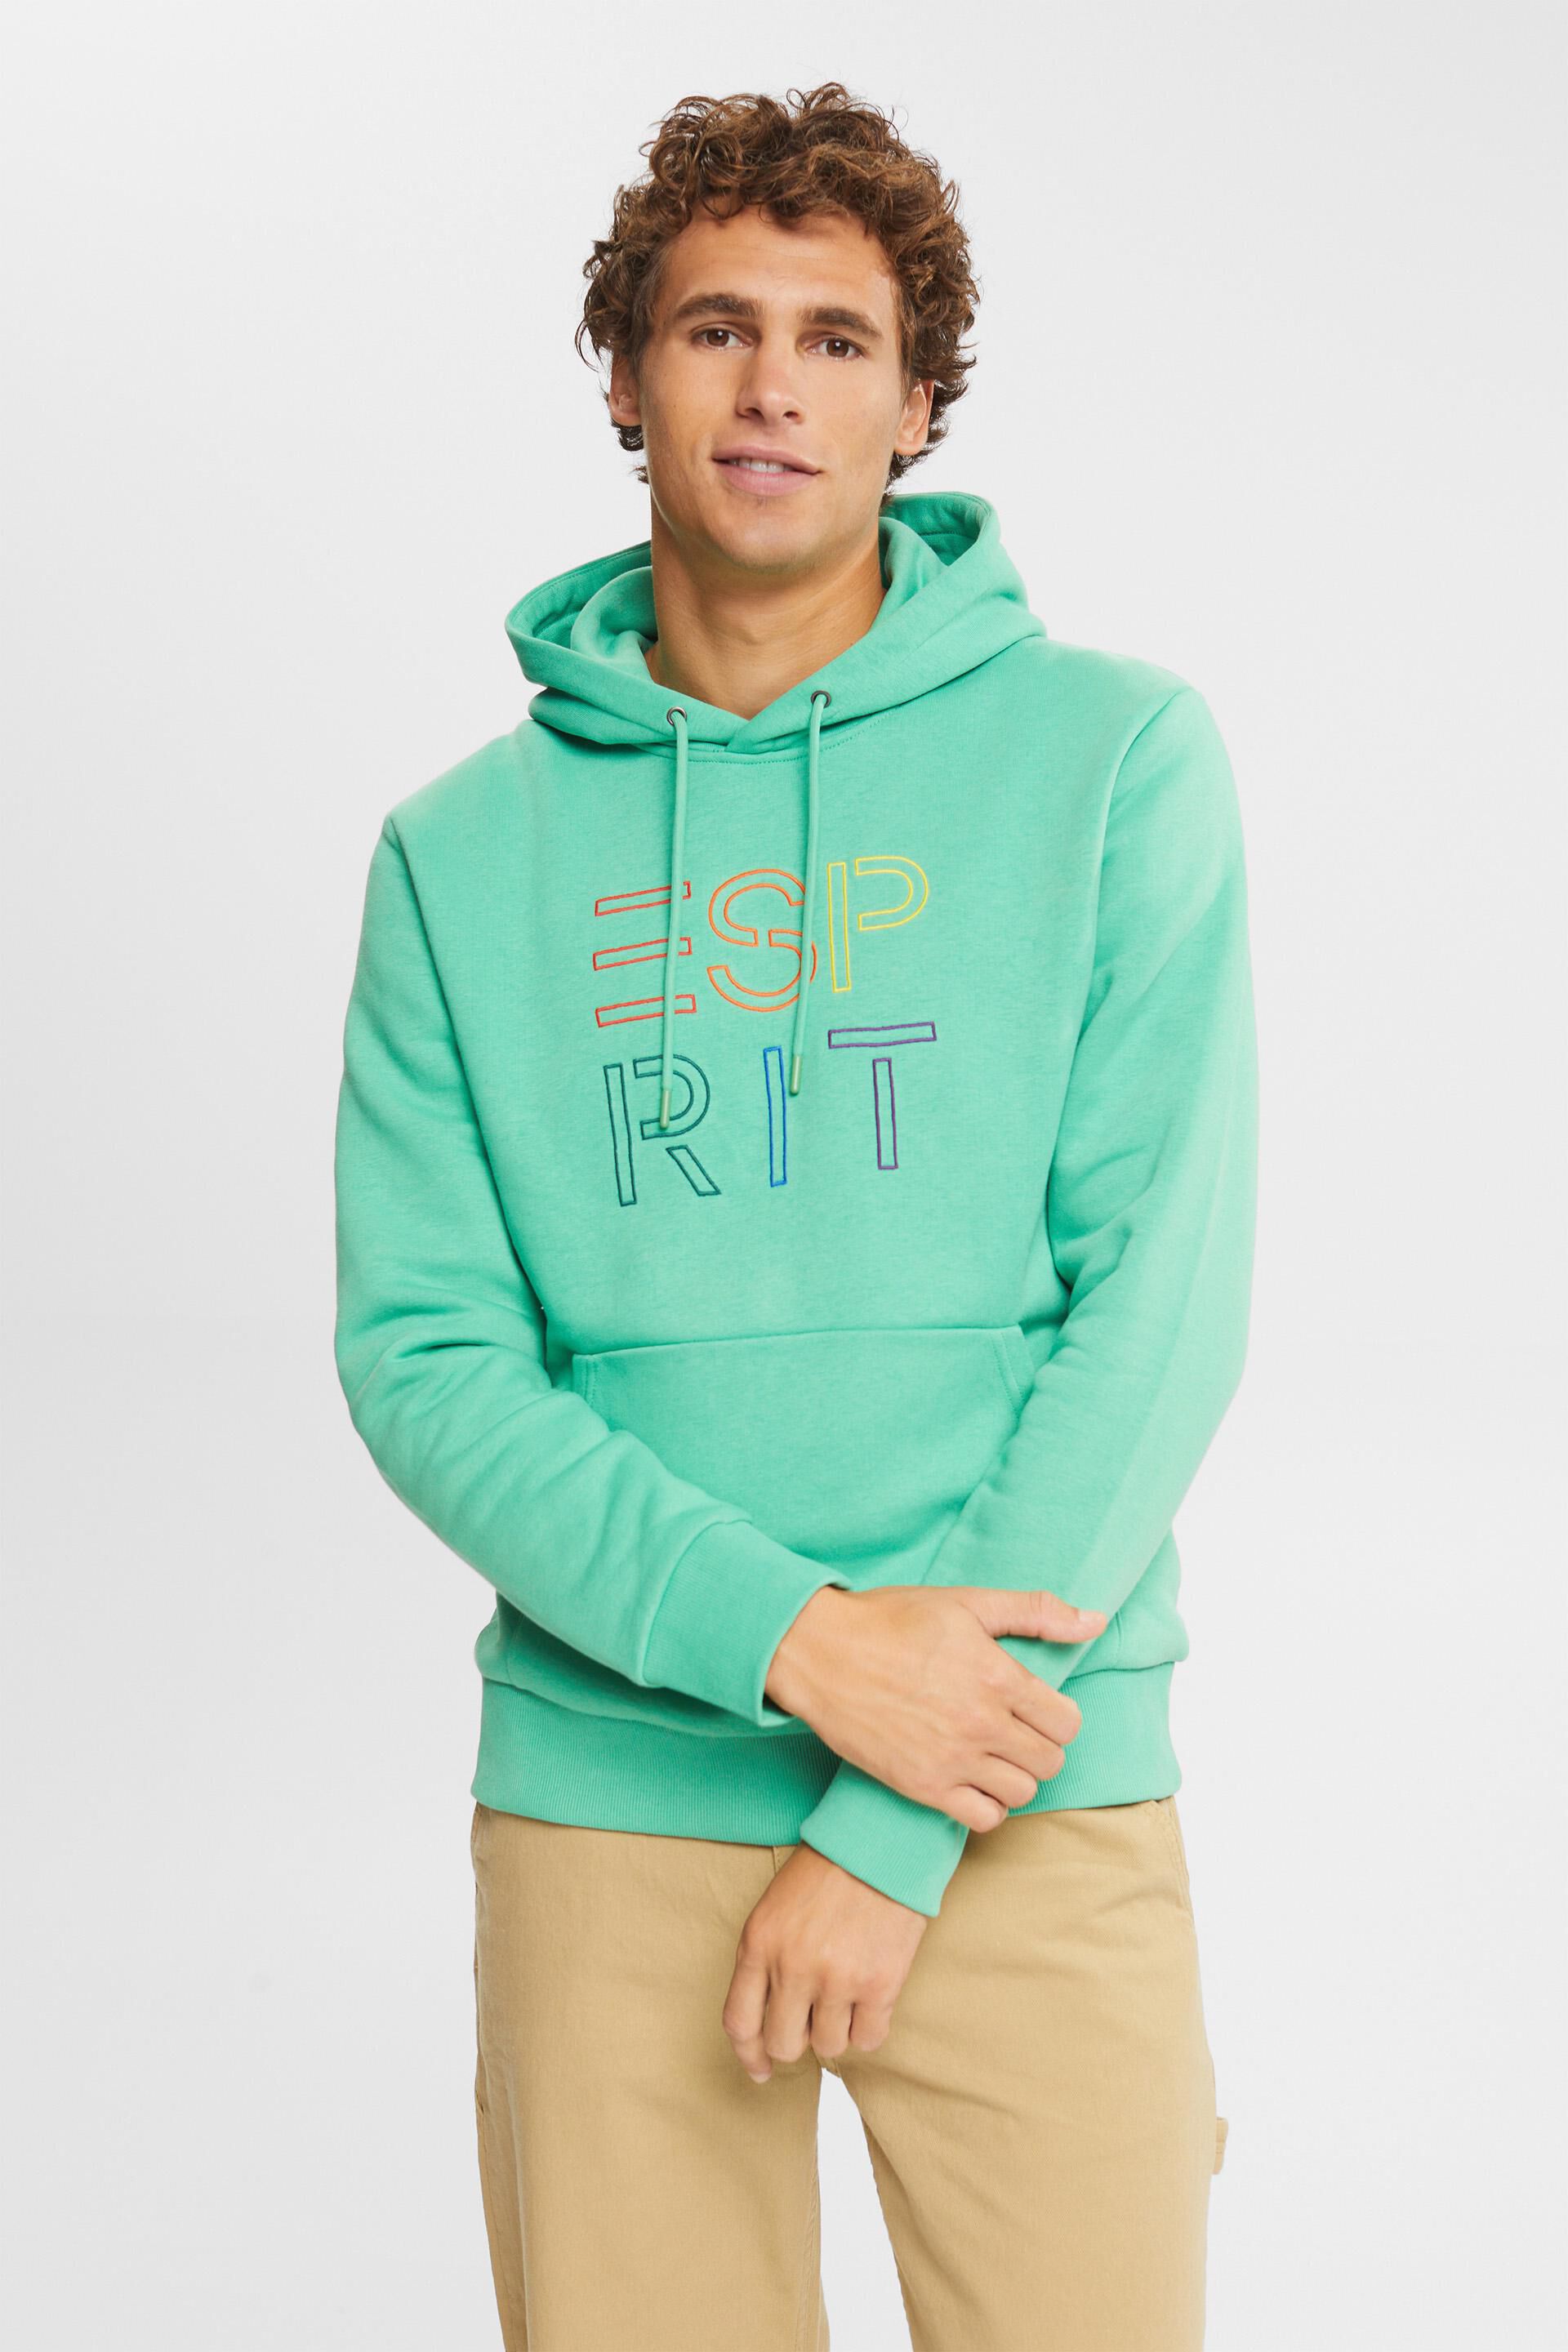 Esprit logo with material: recycled of embroidery hoodie Made